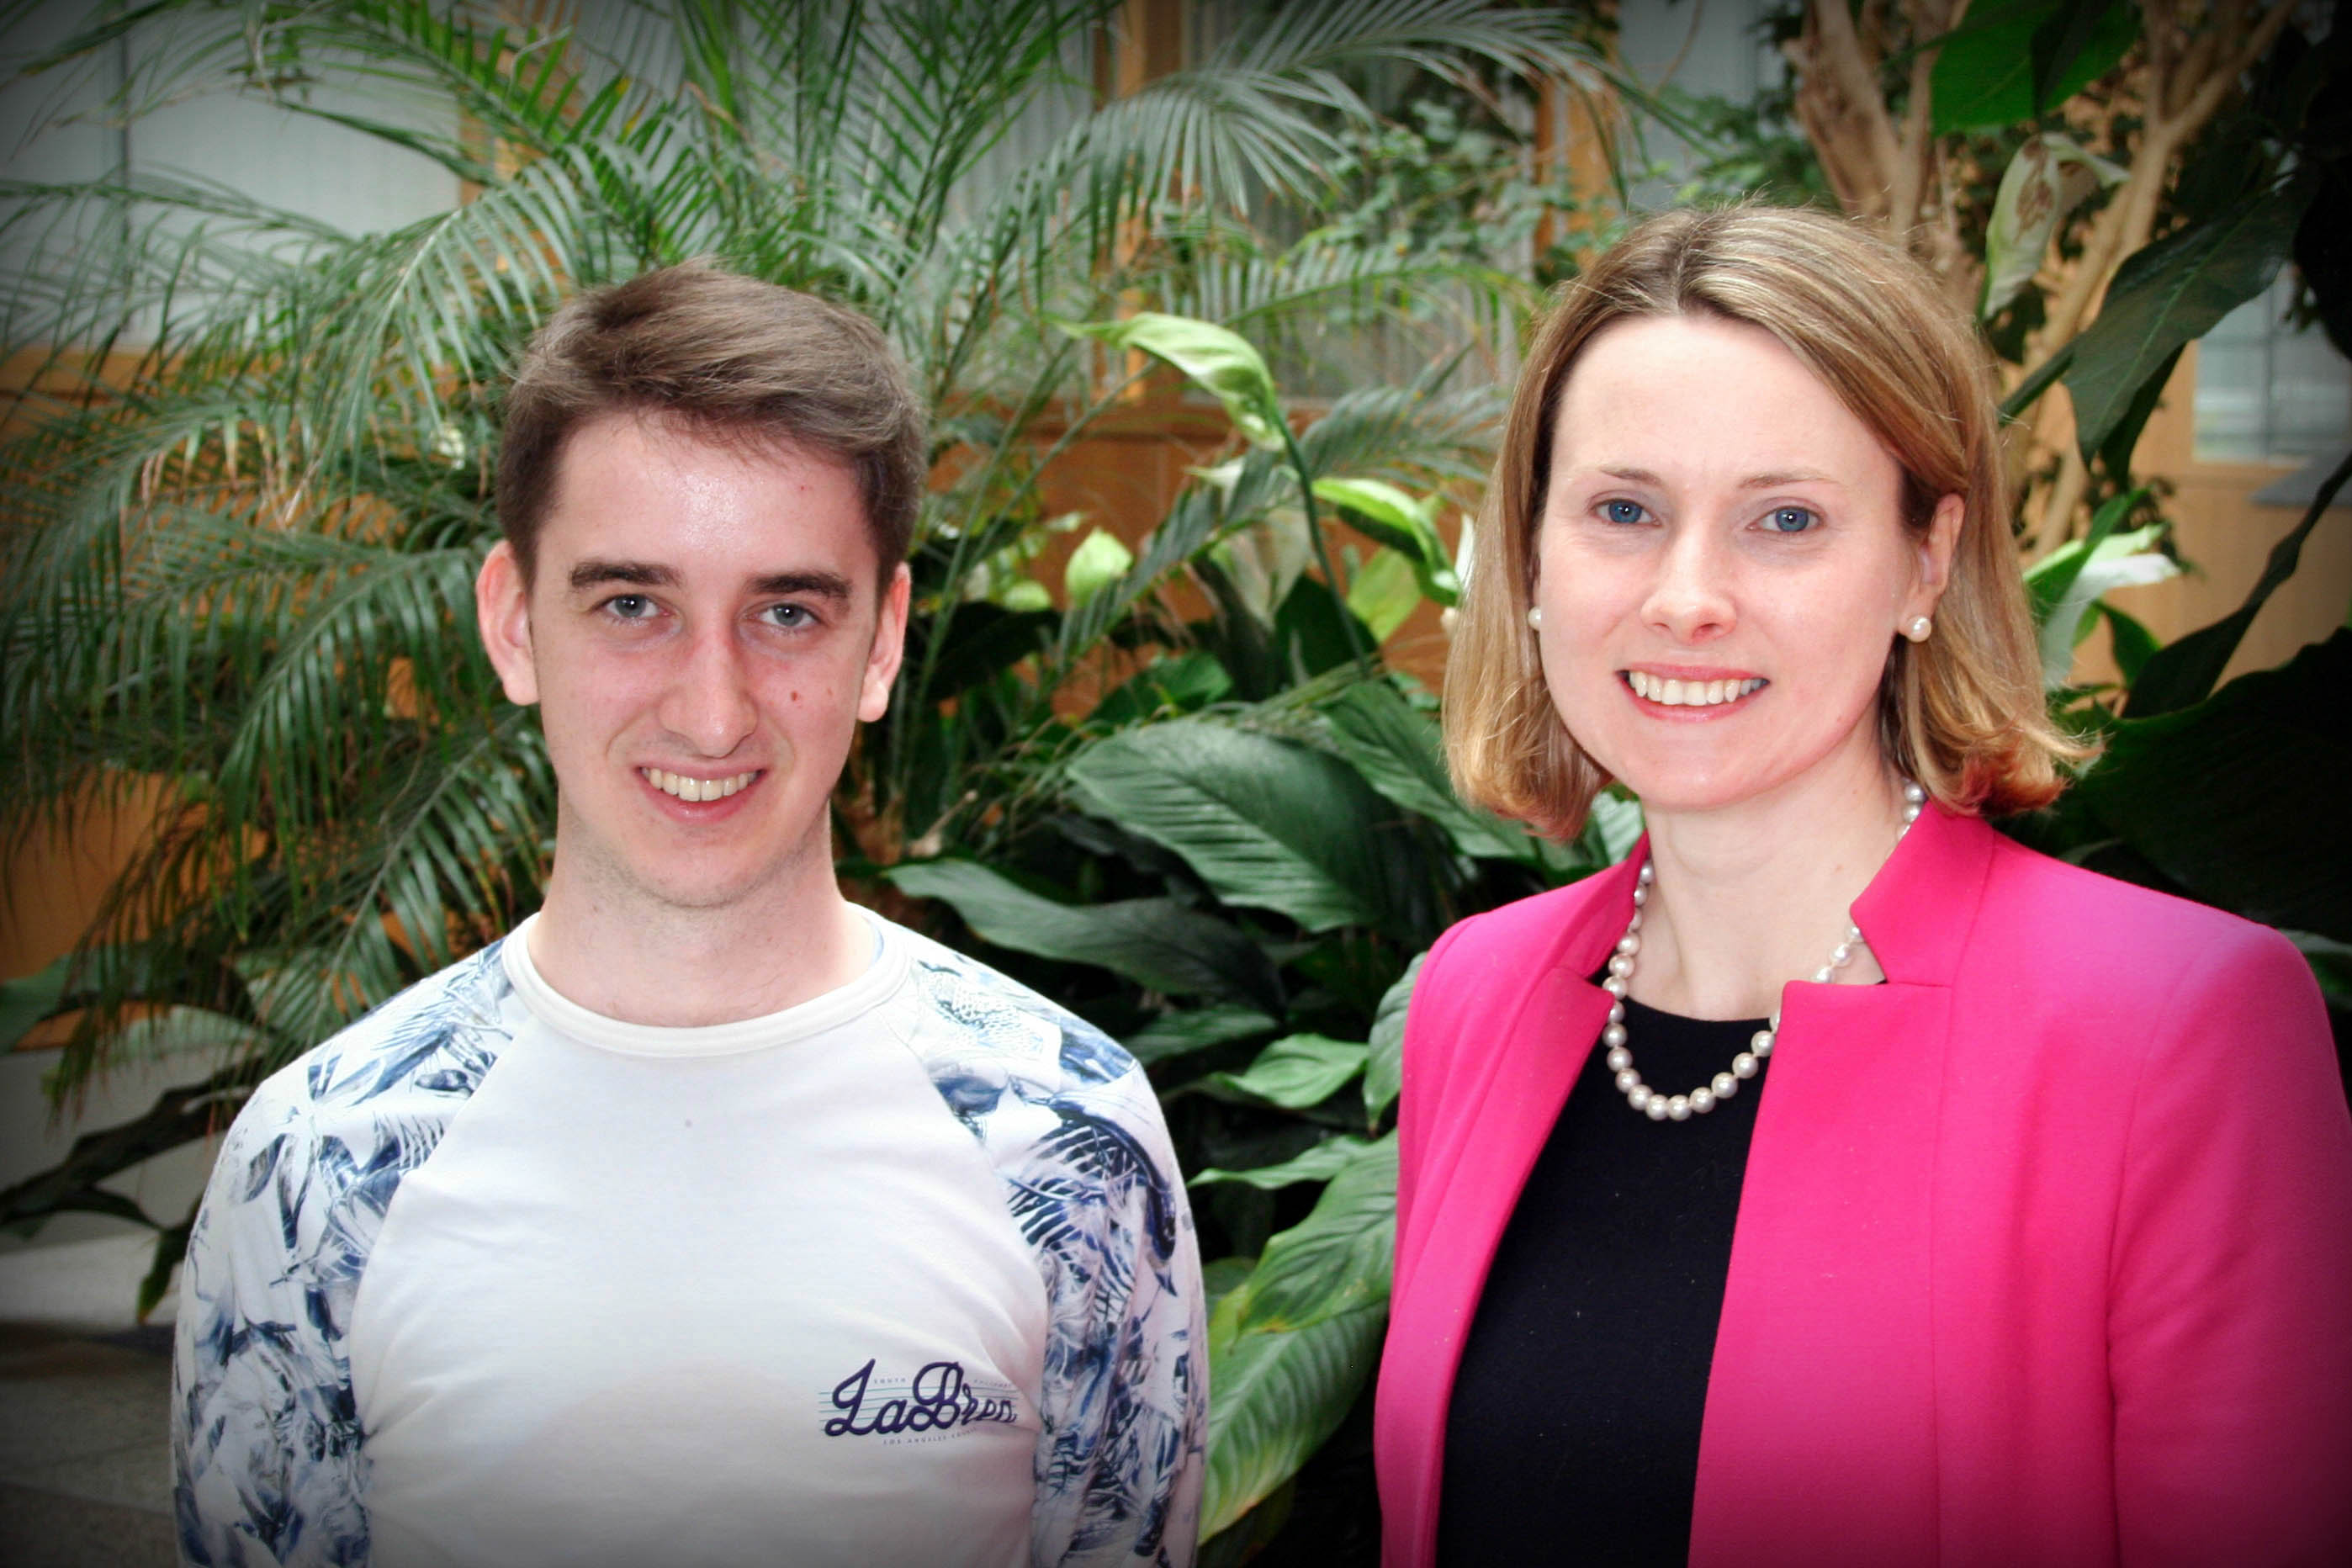 Donagh O'Shea is awarded a scholarship from the Health Research Board